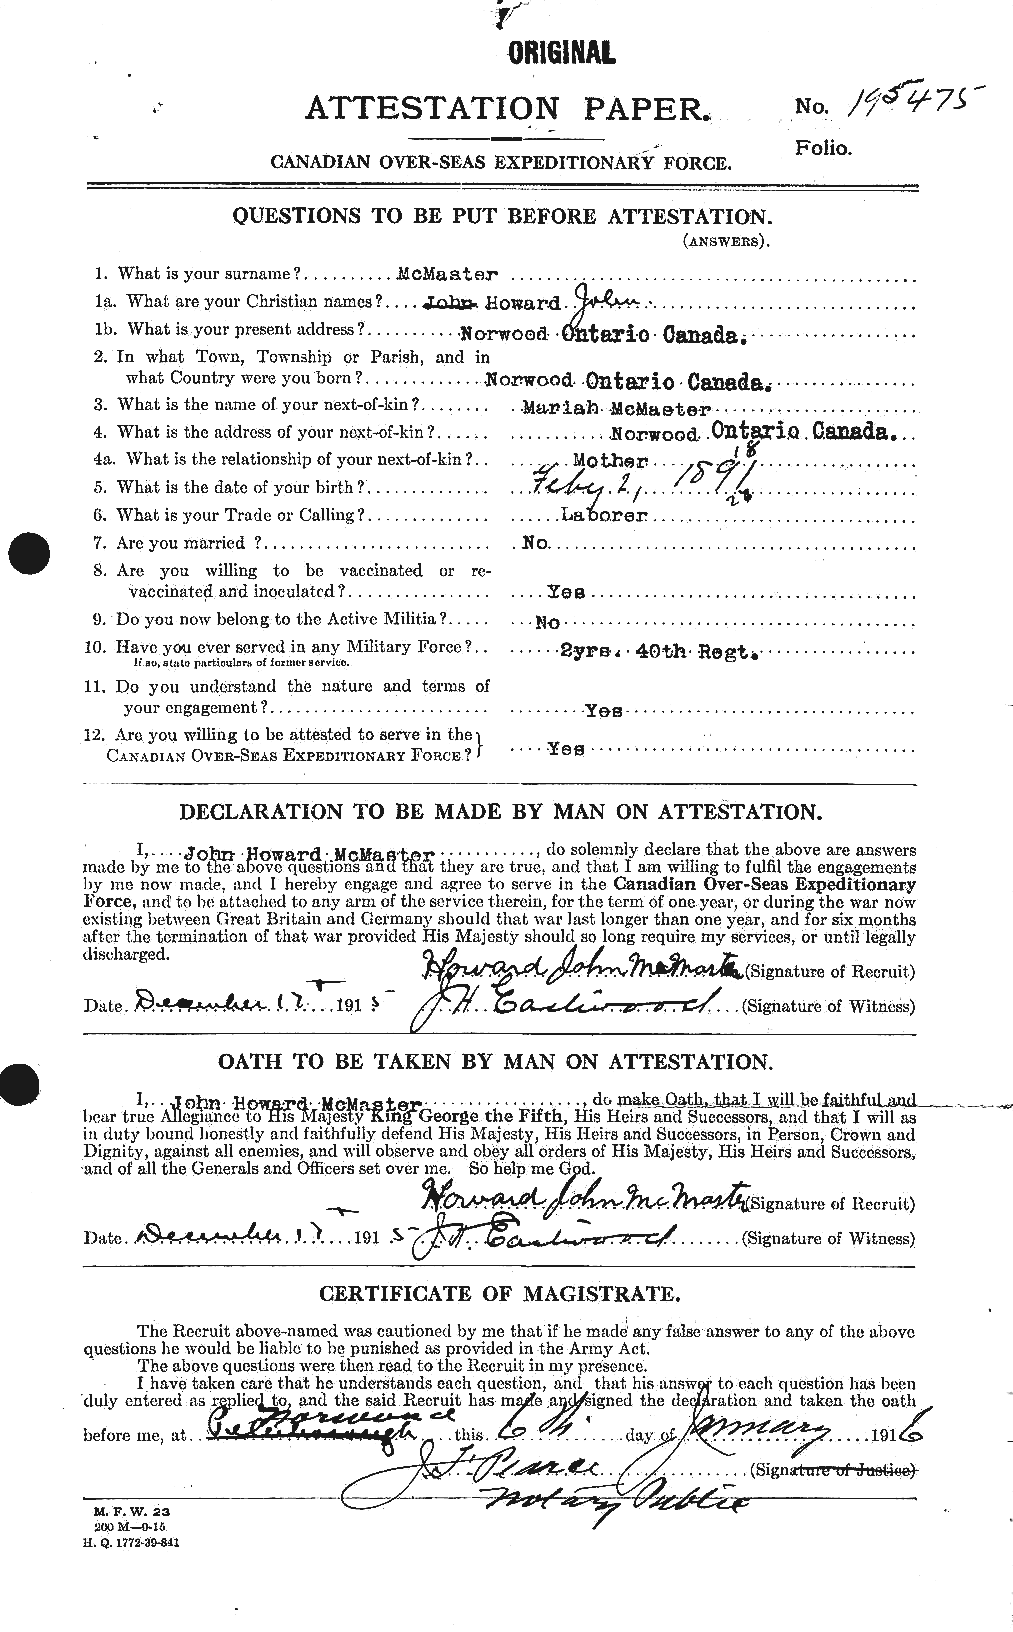 Personnel Records of the First World War - CEF 539944a